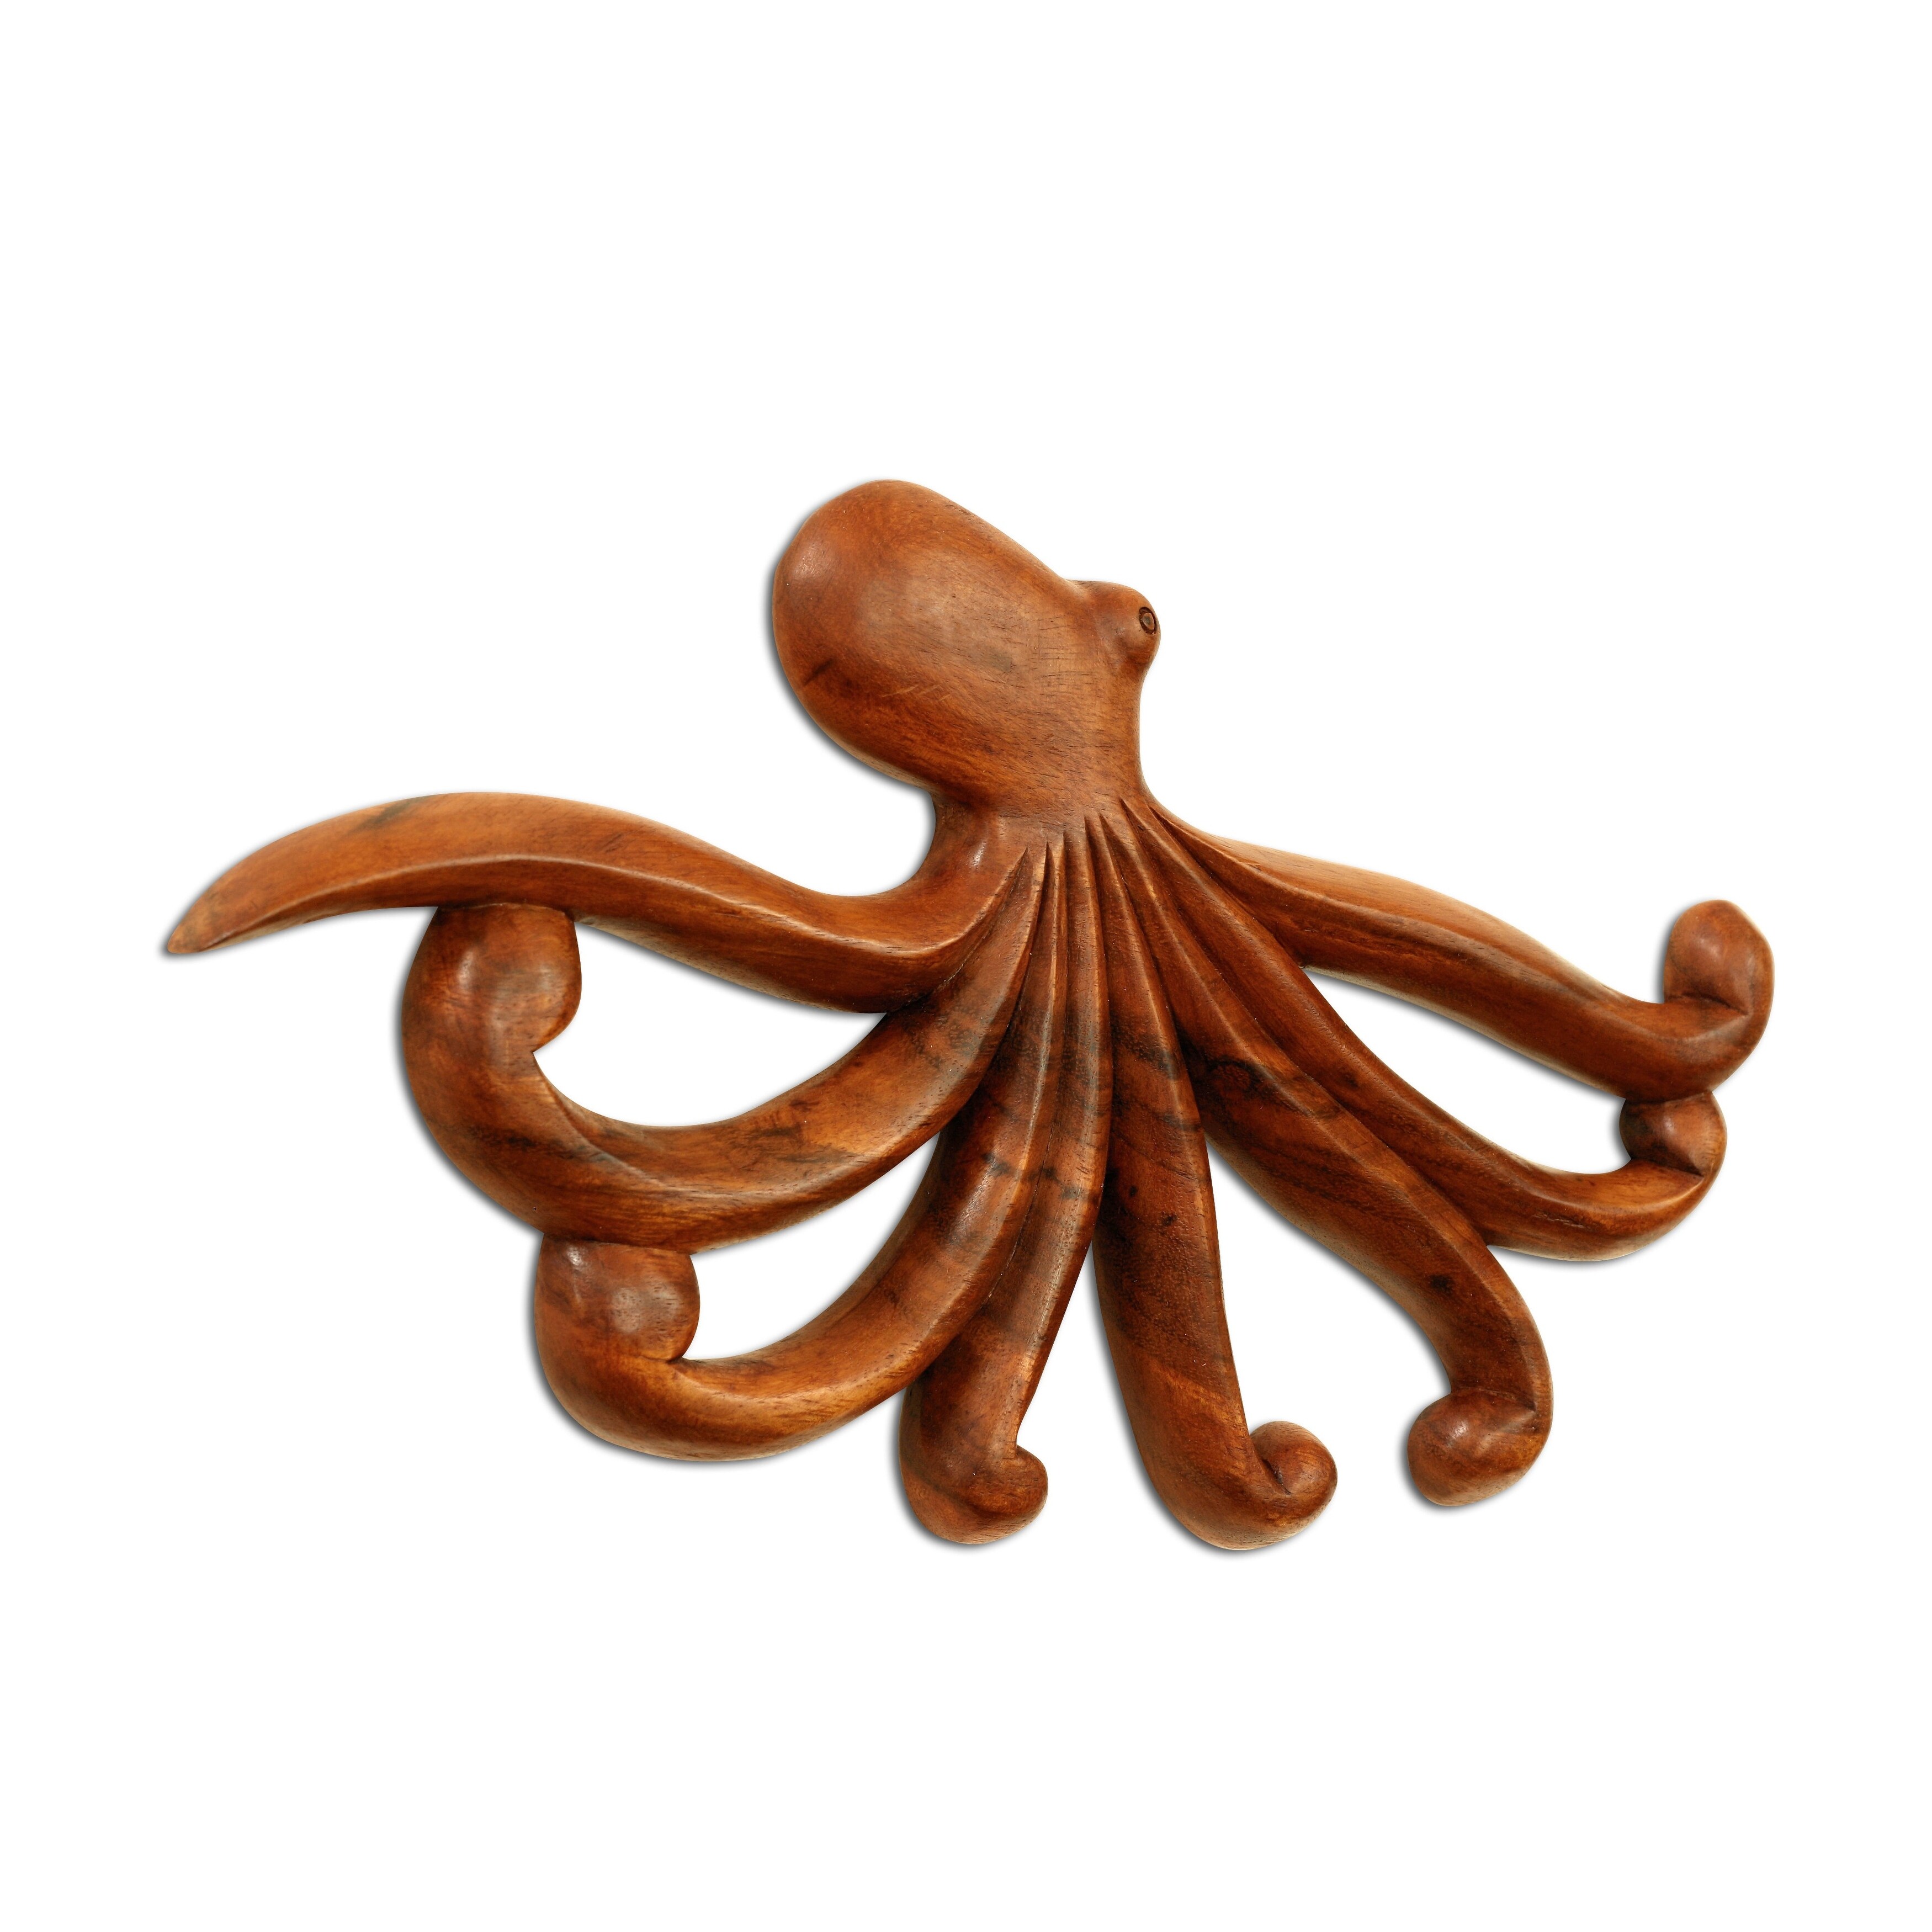 Wooden Octopus Wall Decor Plaque Hanging Sculpture Hand Carved Home Accent  Handcrafted Handmade Seaside Tropical Nautical Ocean